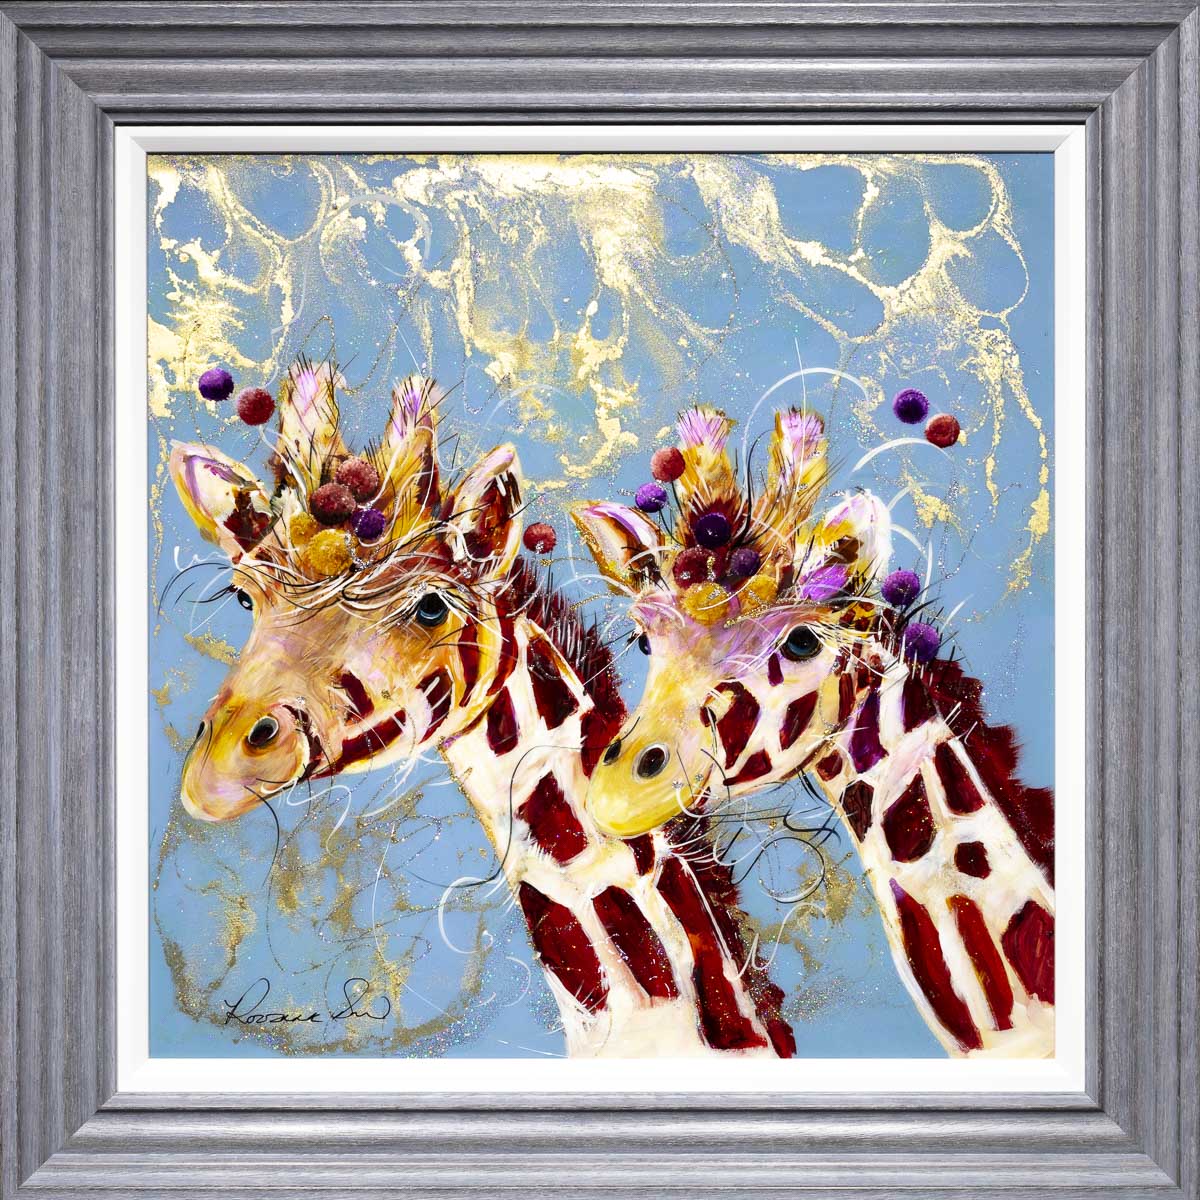 Double the Trouble - Original Rozanne Bell Framed